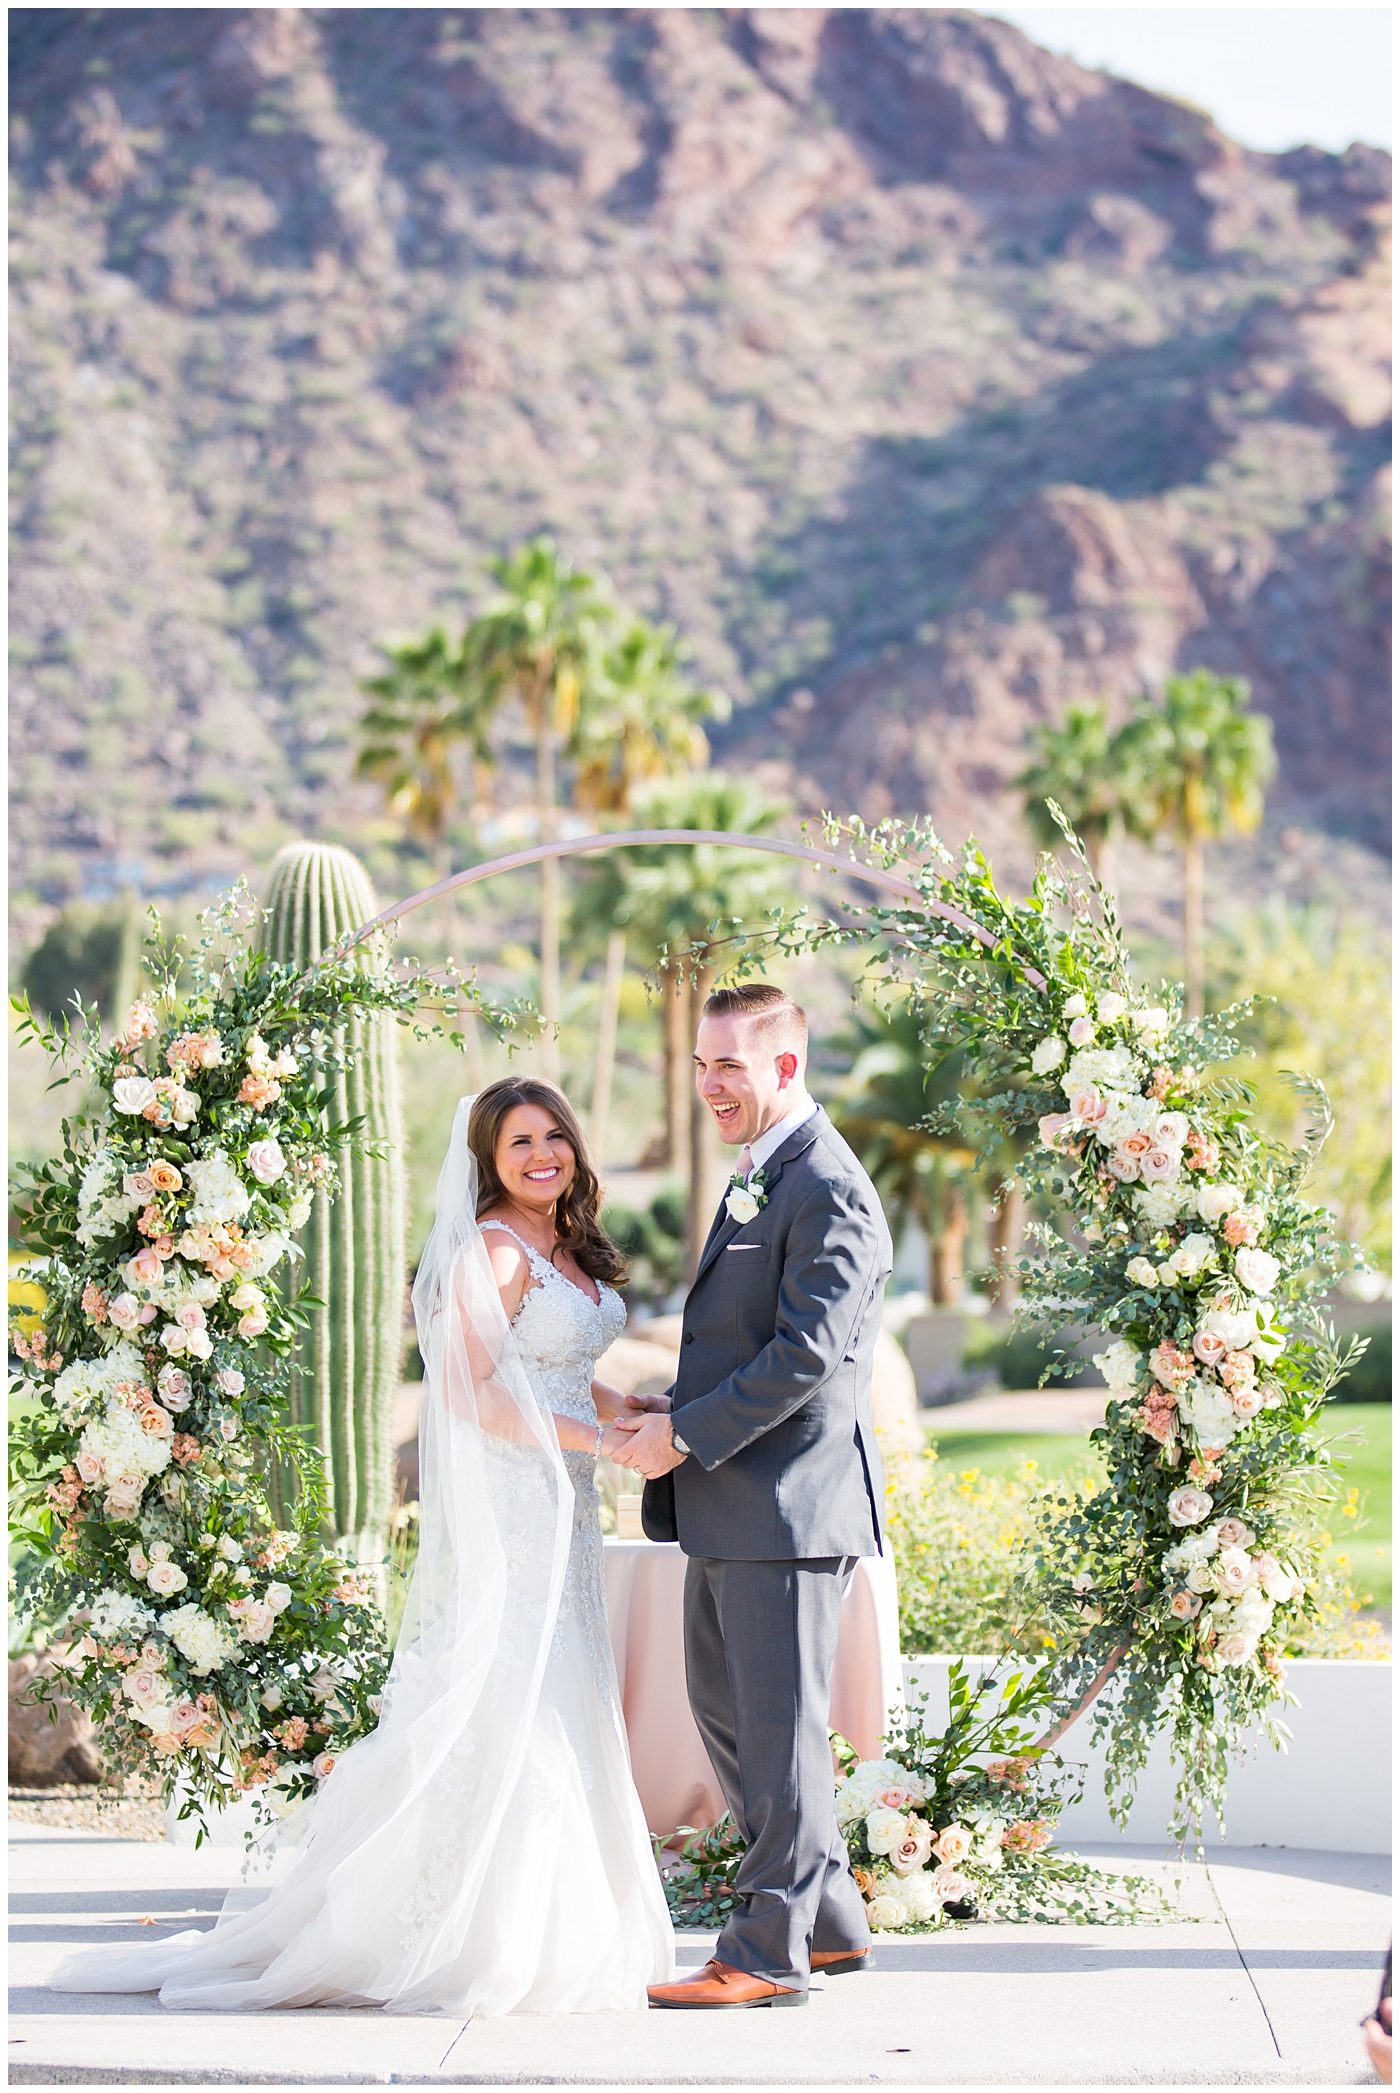 bride in wtoo watters wedding dress with lace straps with wildflower bridal bouquet with soft pink, blush, white, greenery flowers including roses, dahlias, snapdragons with groom in gray suit with pink tie and ranunculus boutonniere during their outdoor wedding ceremony with unique circle arch